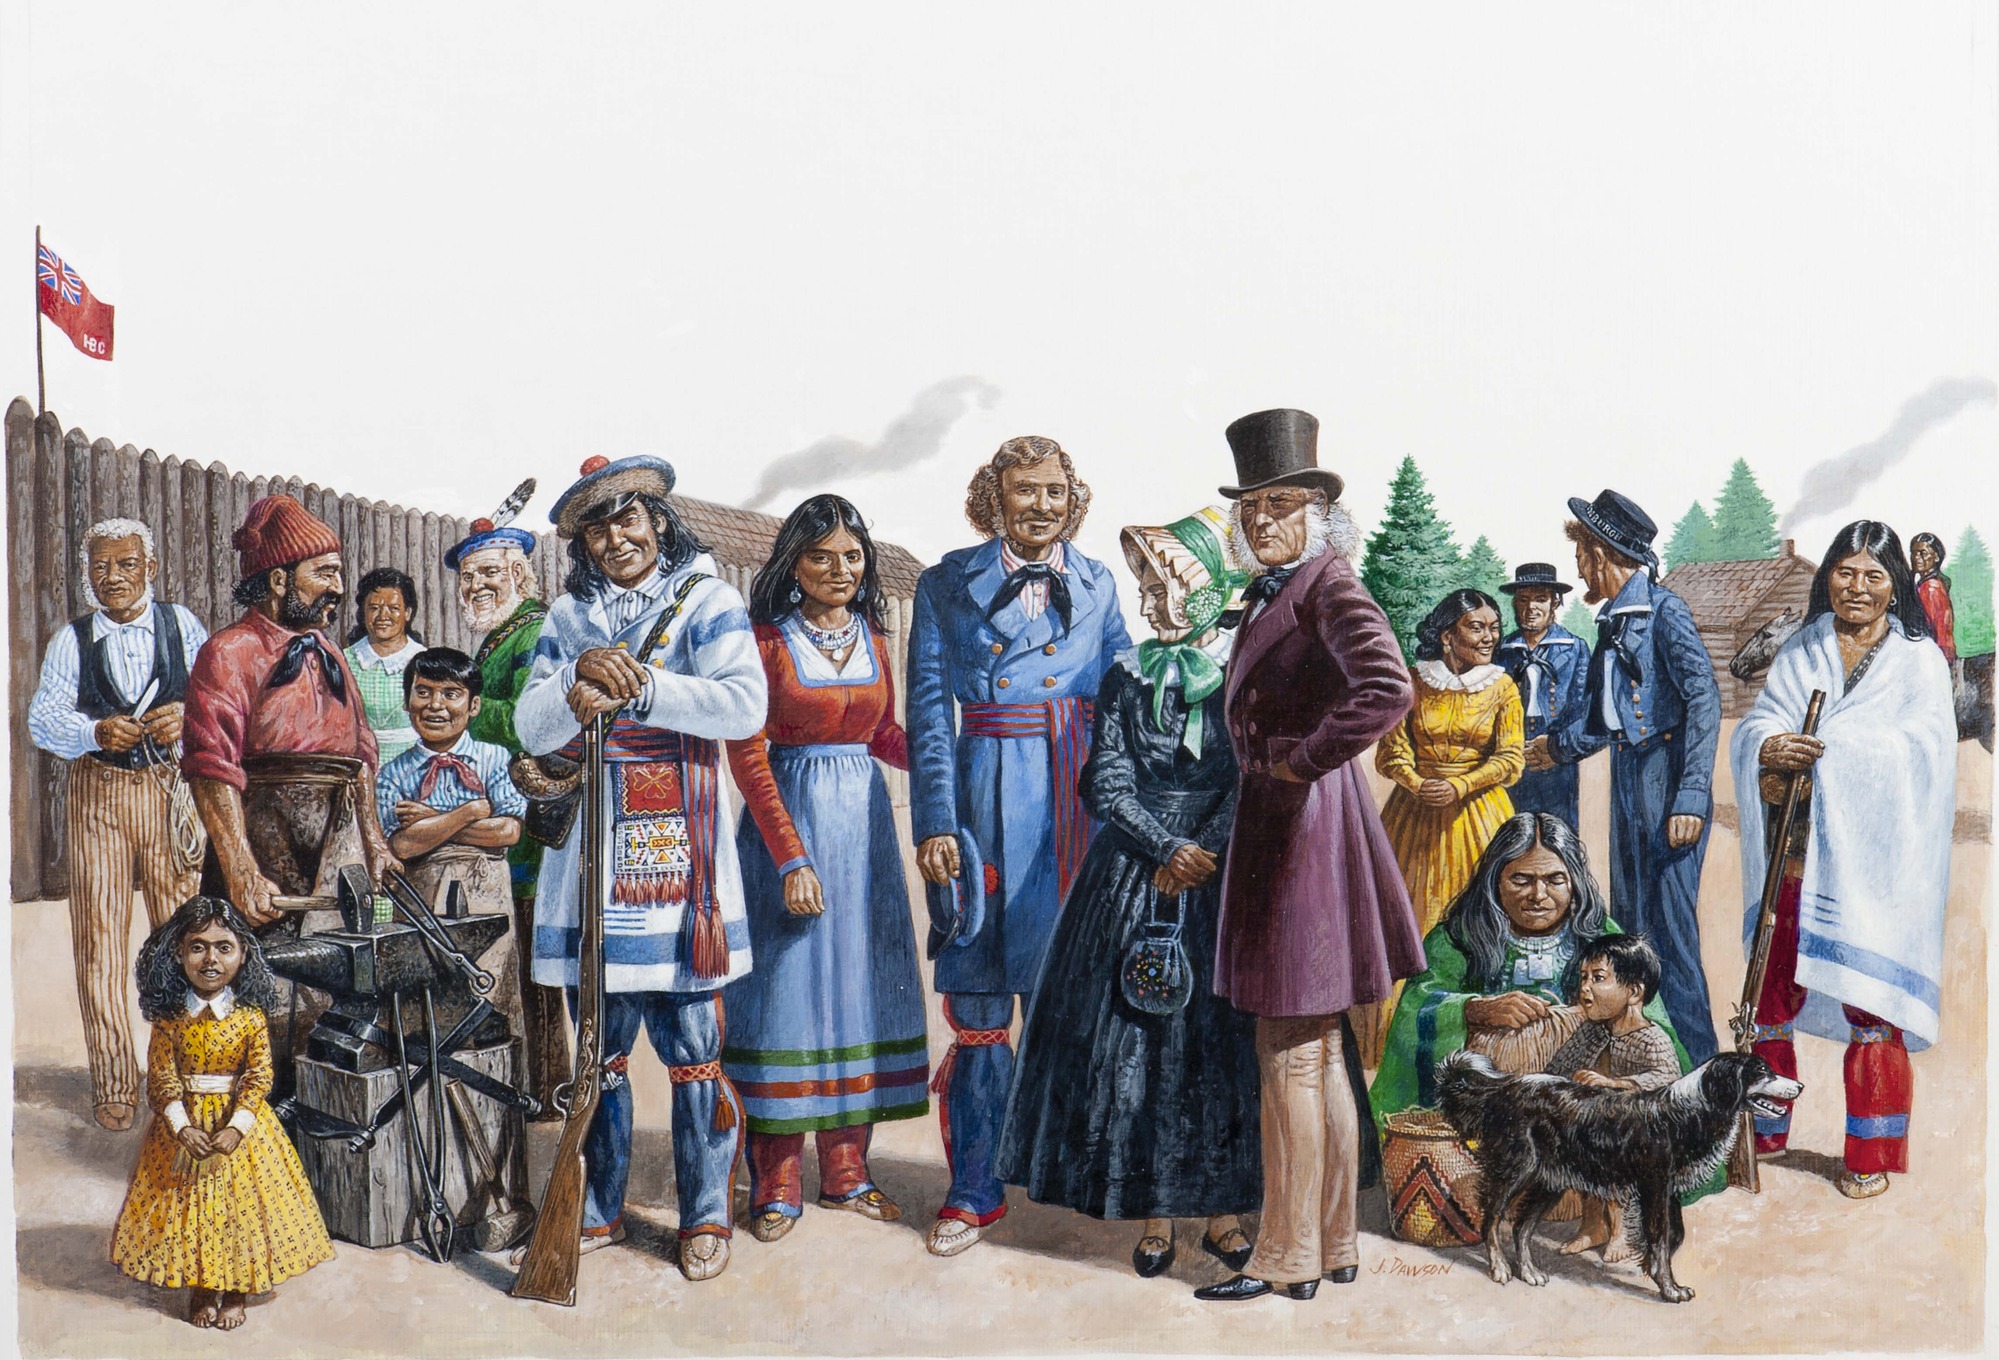 People of Fort Vancouver, c1830-1840s. Mélange of eighteen people of various professions representing Englishmen, Scotsmen, Irishmen, French-Canadians, Americans, Native Indians from a number of tribes, Hawaiians, and people of mixed ancestry.